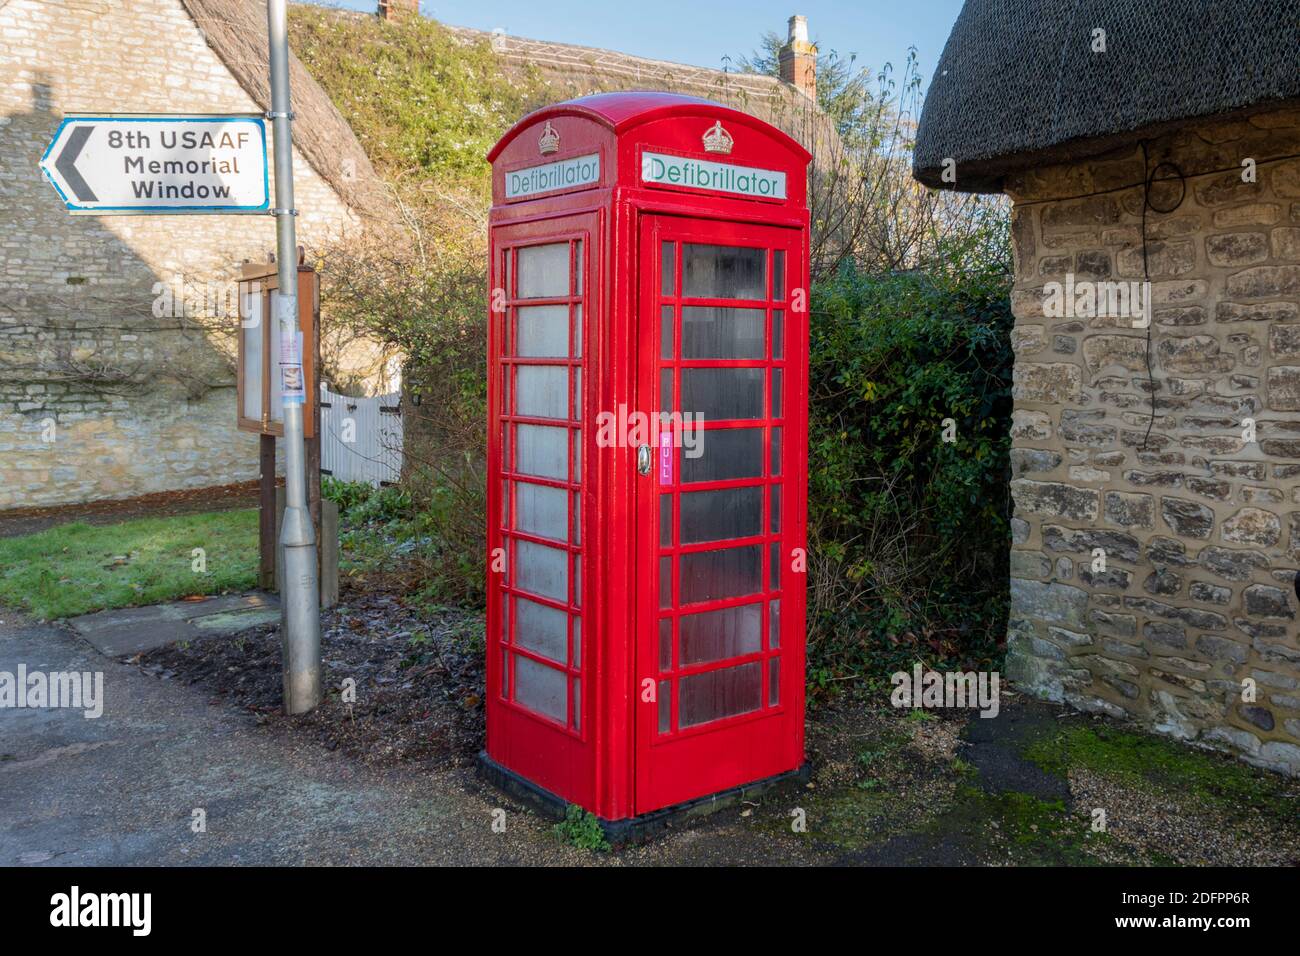 Defibrillator in an old fashioned phone village box Stock Photo